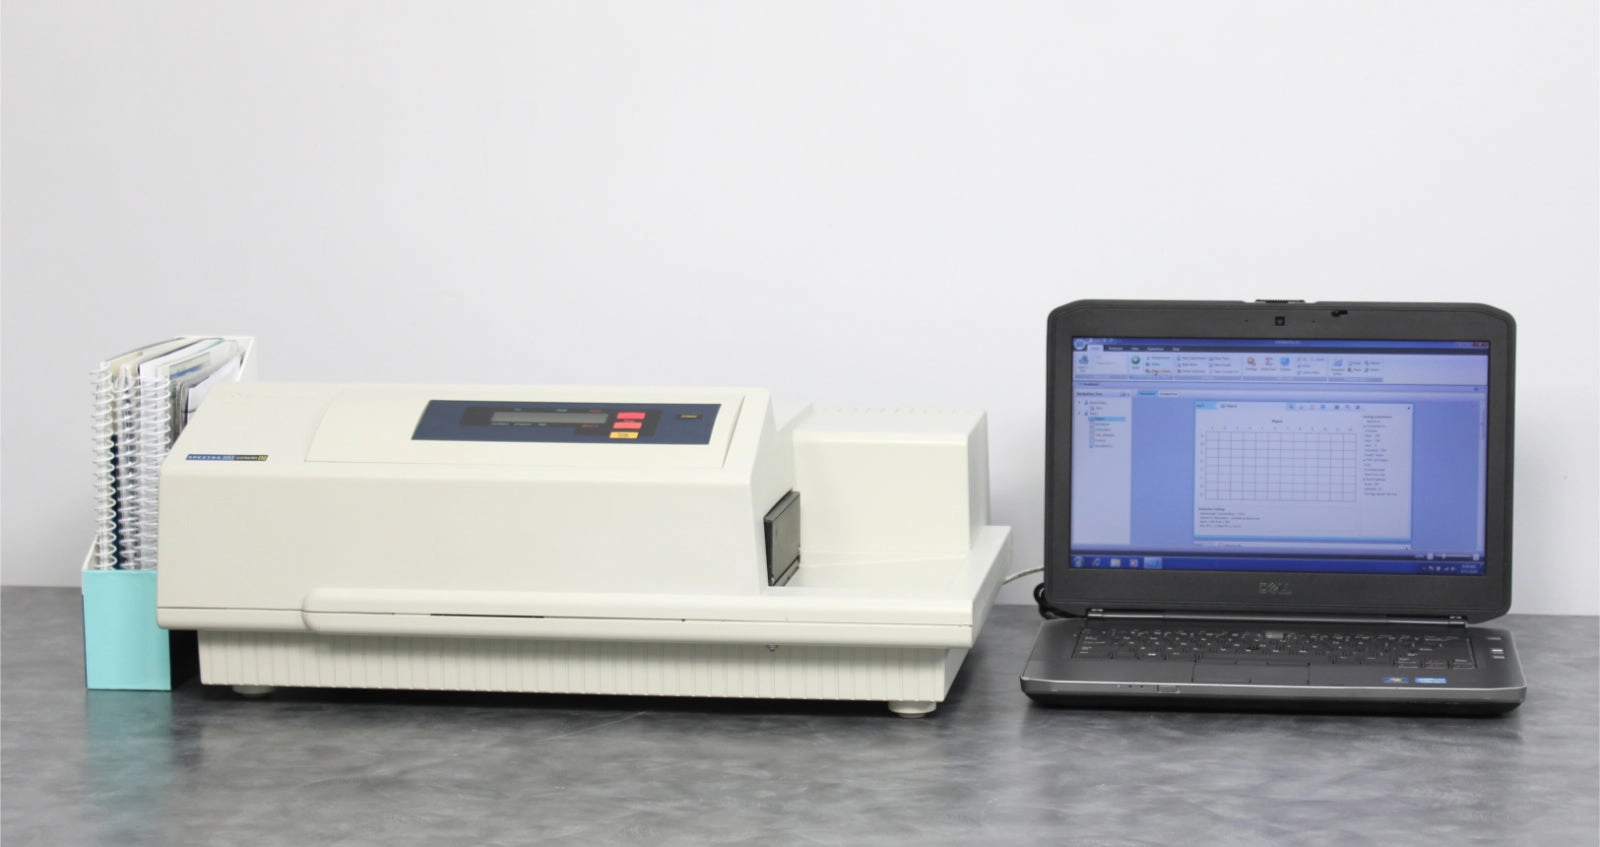 Molecular Devices SpectraMax Gemini EM Fluorescence Microplate Reader and Laptop